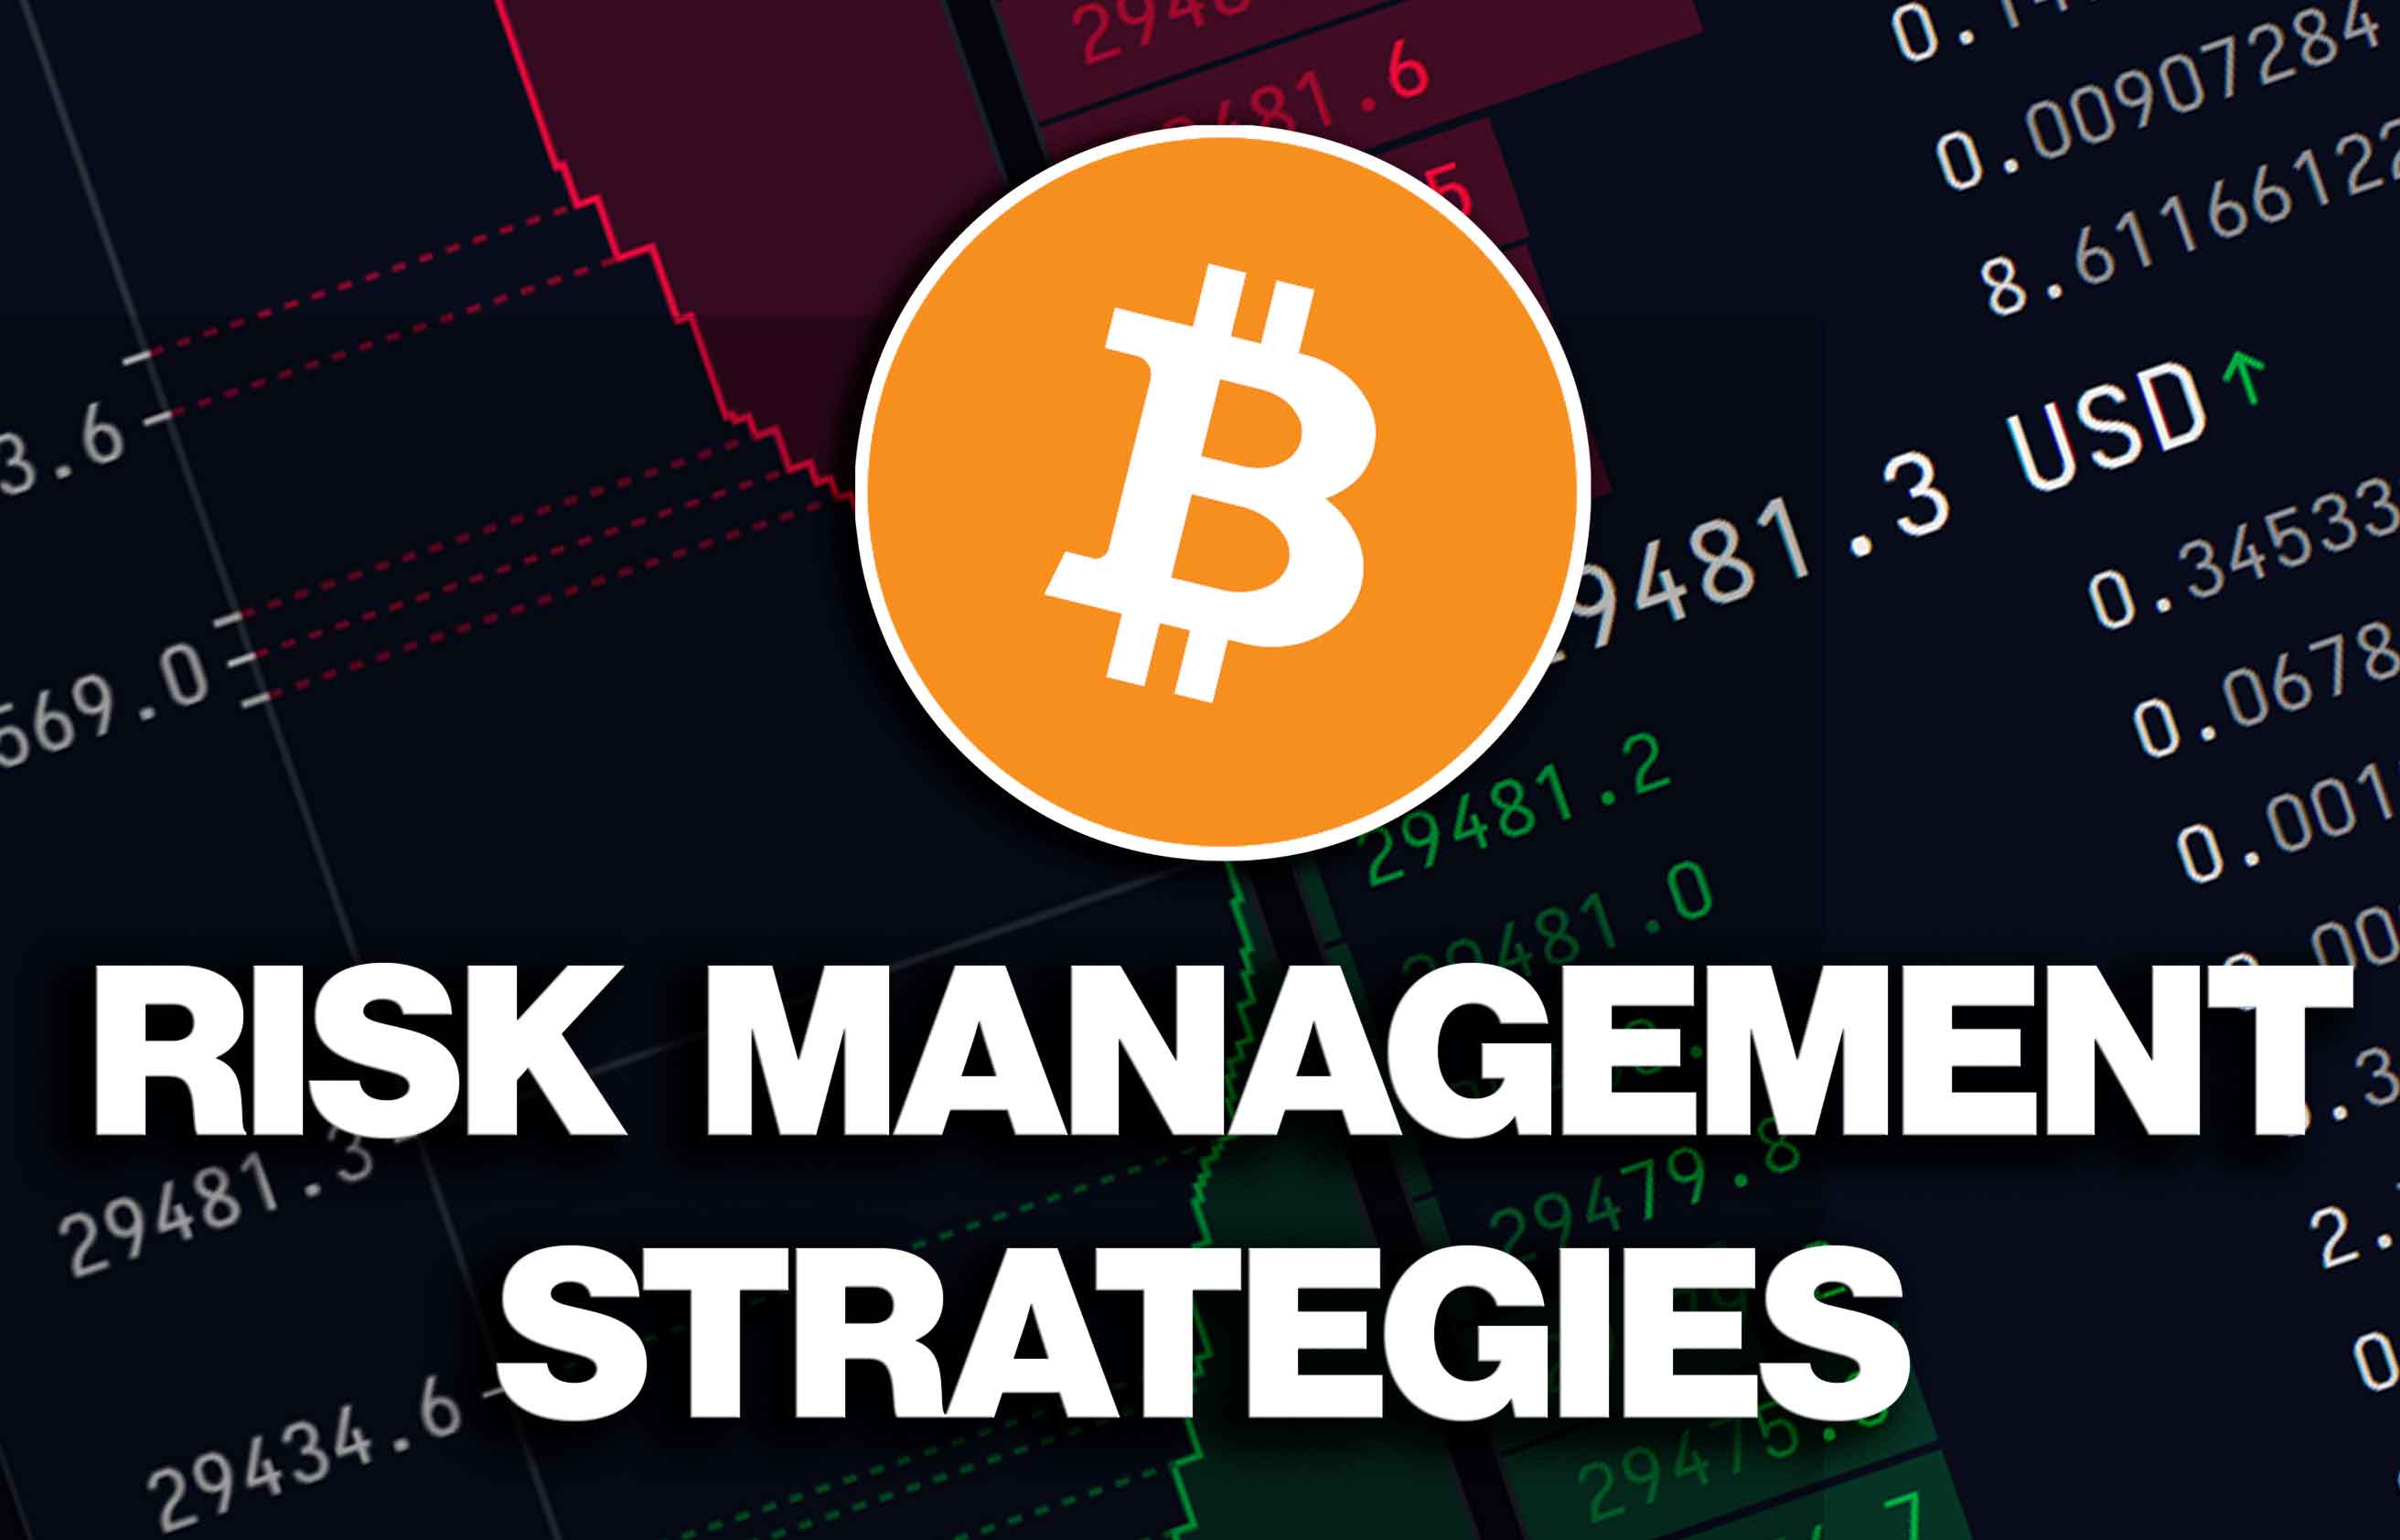 What are the Most Effective Risk Management Strategies for Cryptocurrency Traders?